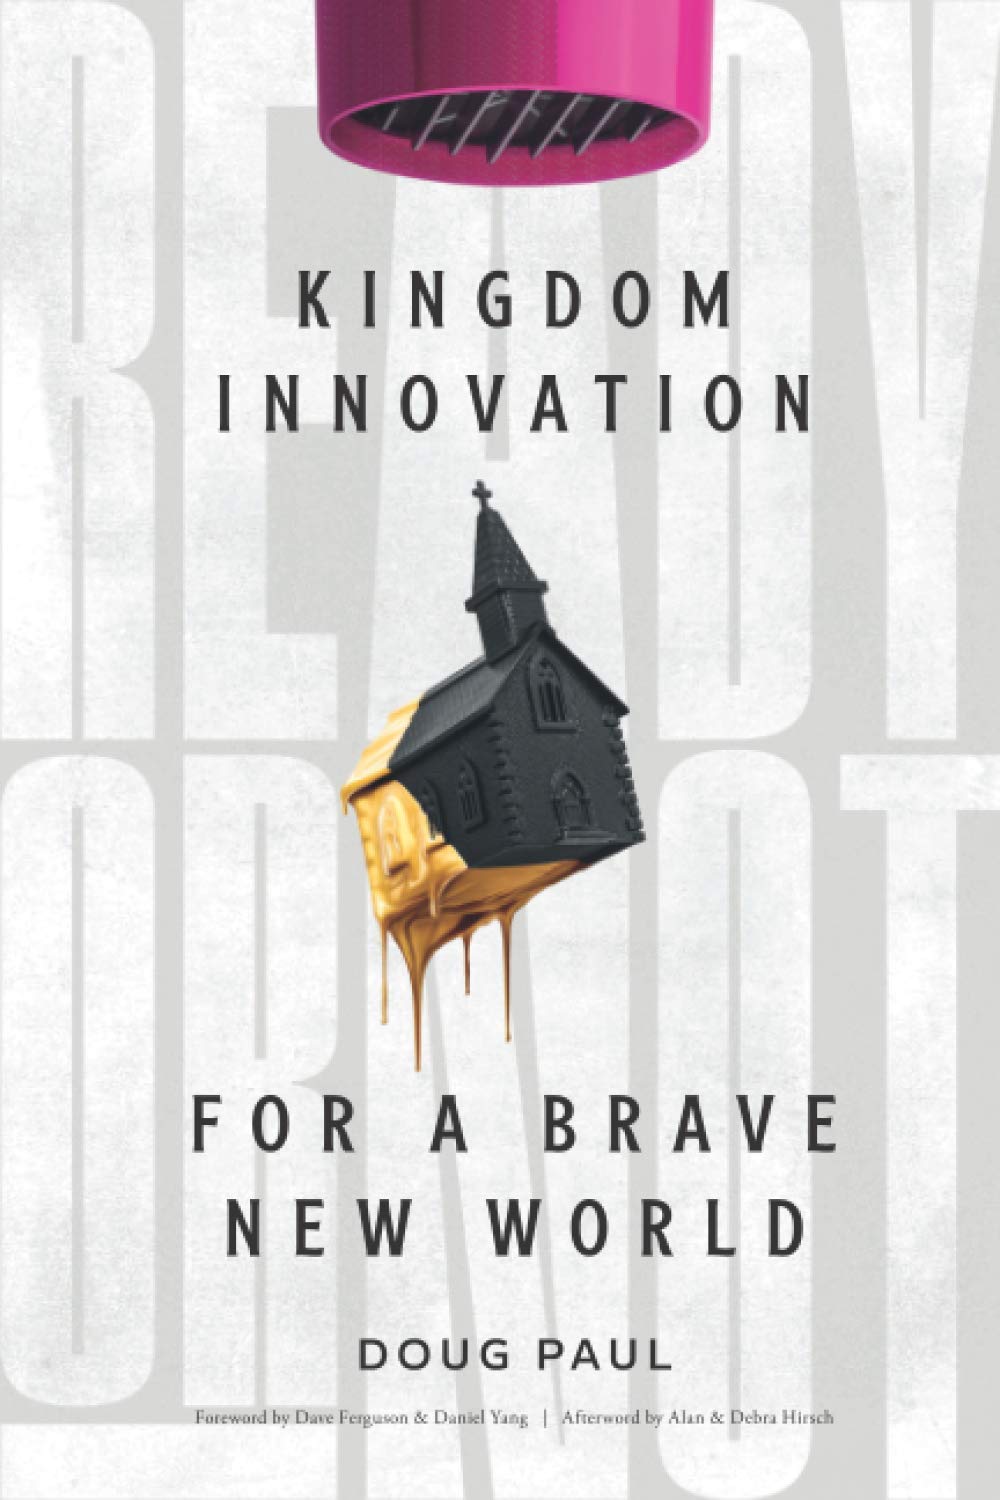 brave new world book review free